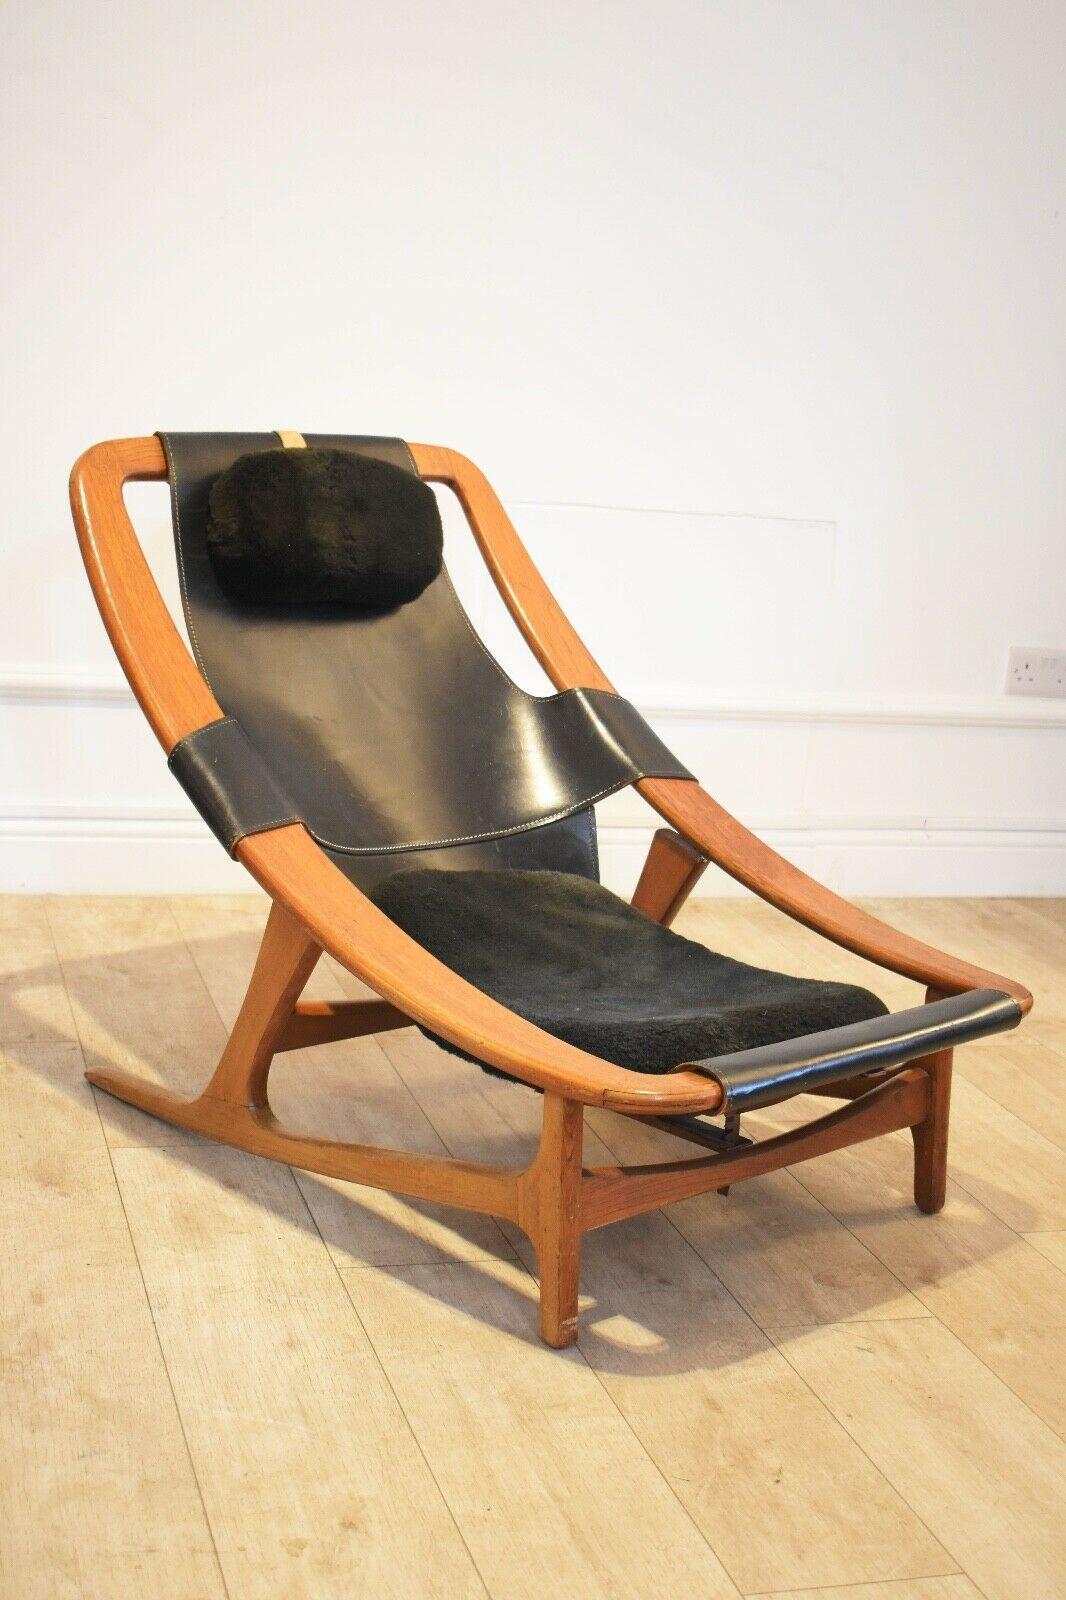 Arne F. Tidemand Ruud for ISA, lounge chair 'Holmenkollen,' teak and light black leather, Italy, 1959. £8,900.00.

This easy chair is designed by Norwegian designer Arne F. Tidemand Ruud. 

This chair is very dynamic due it's design and